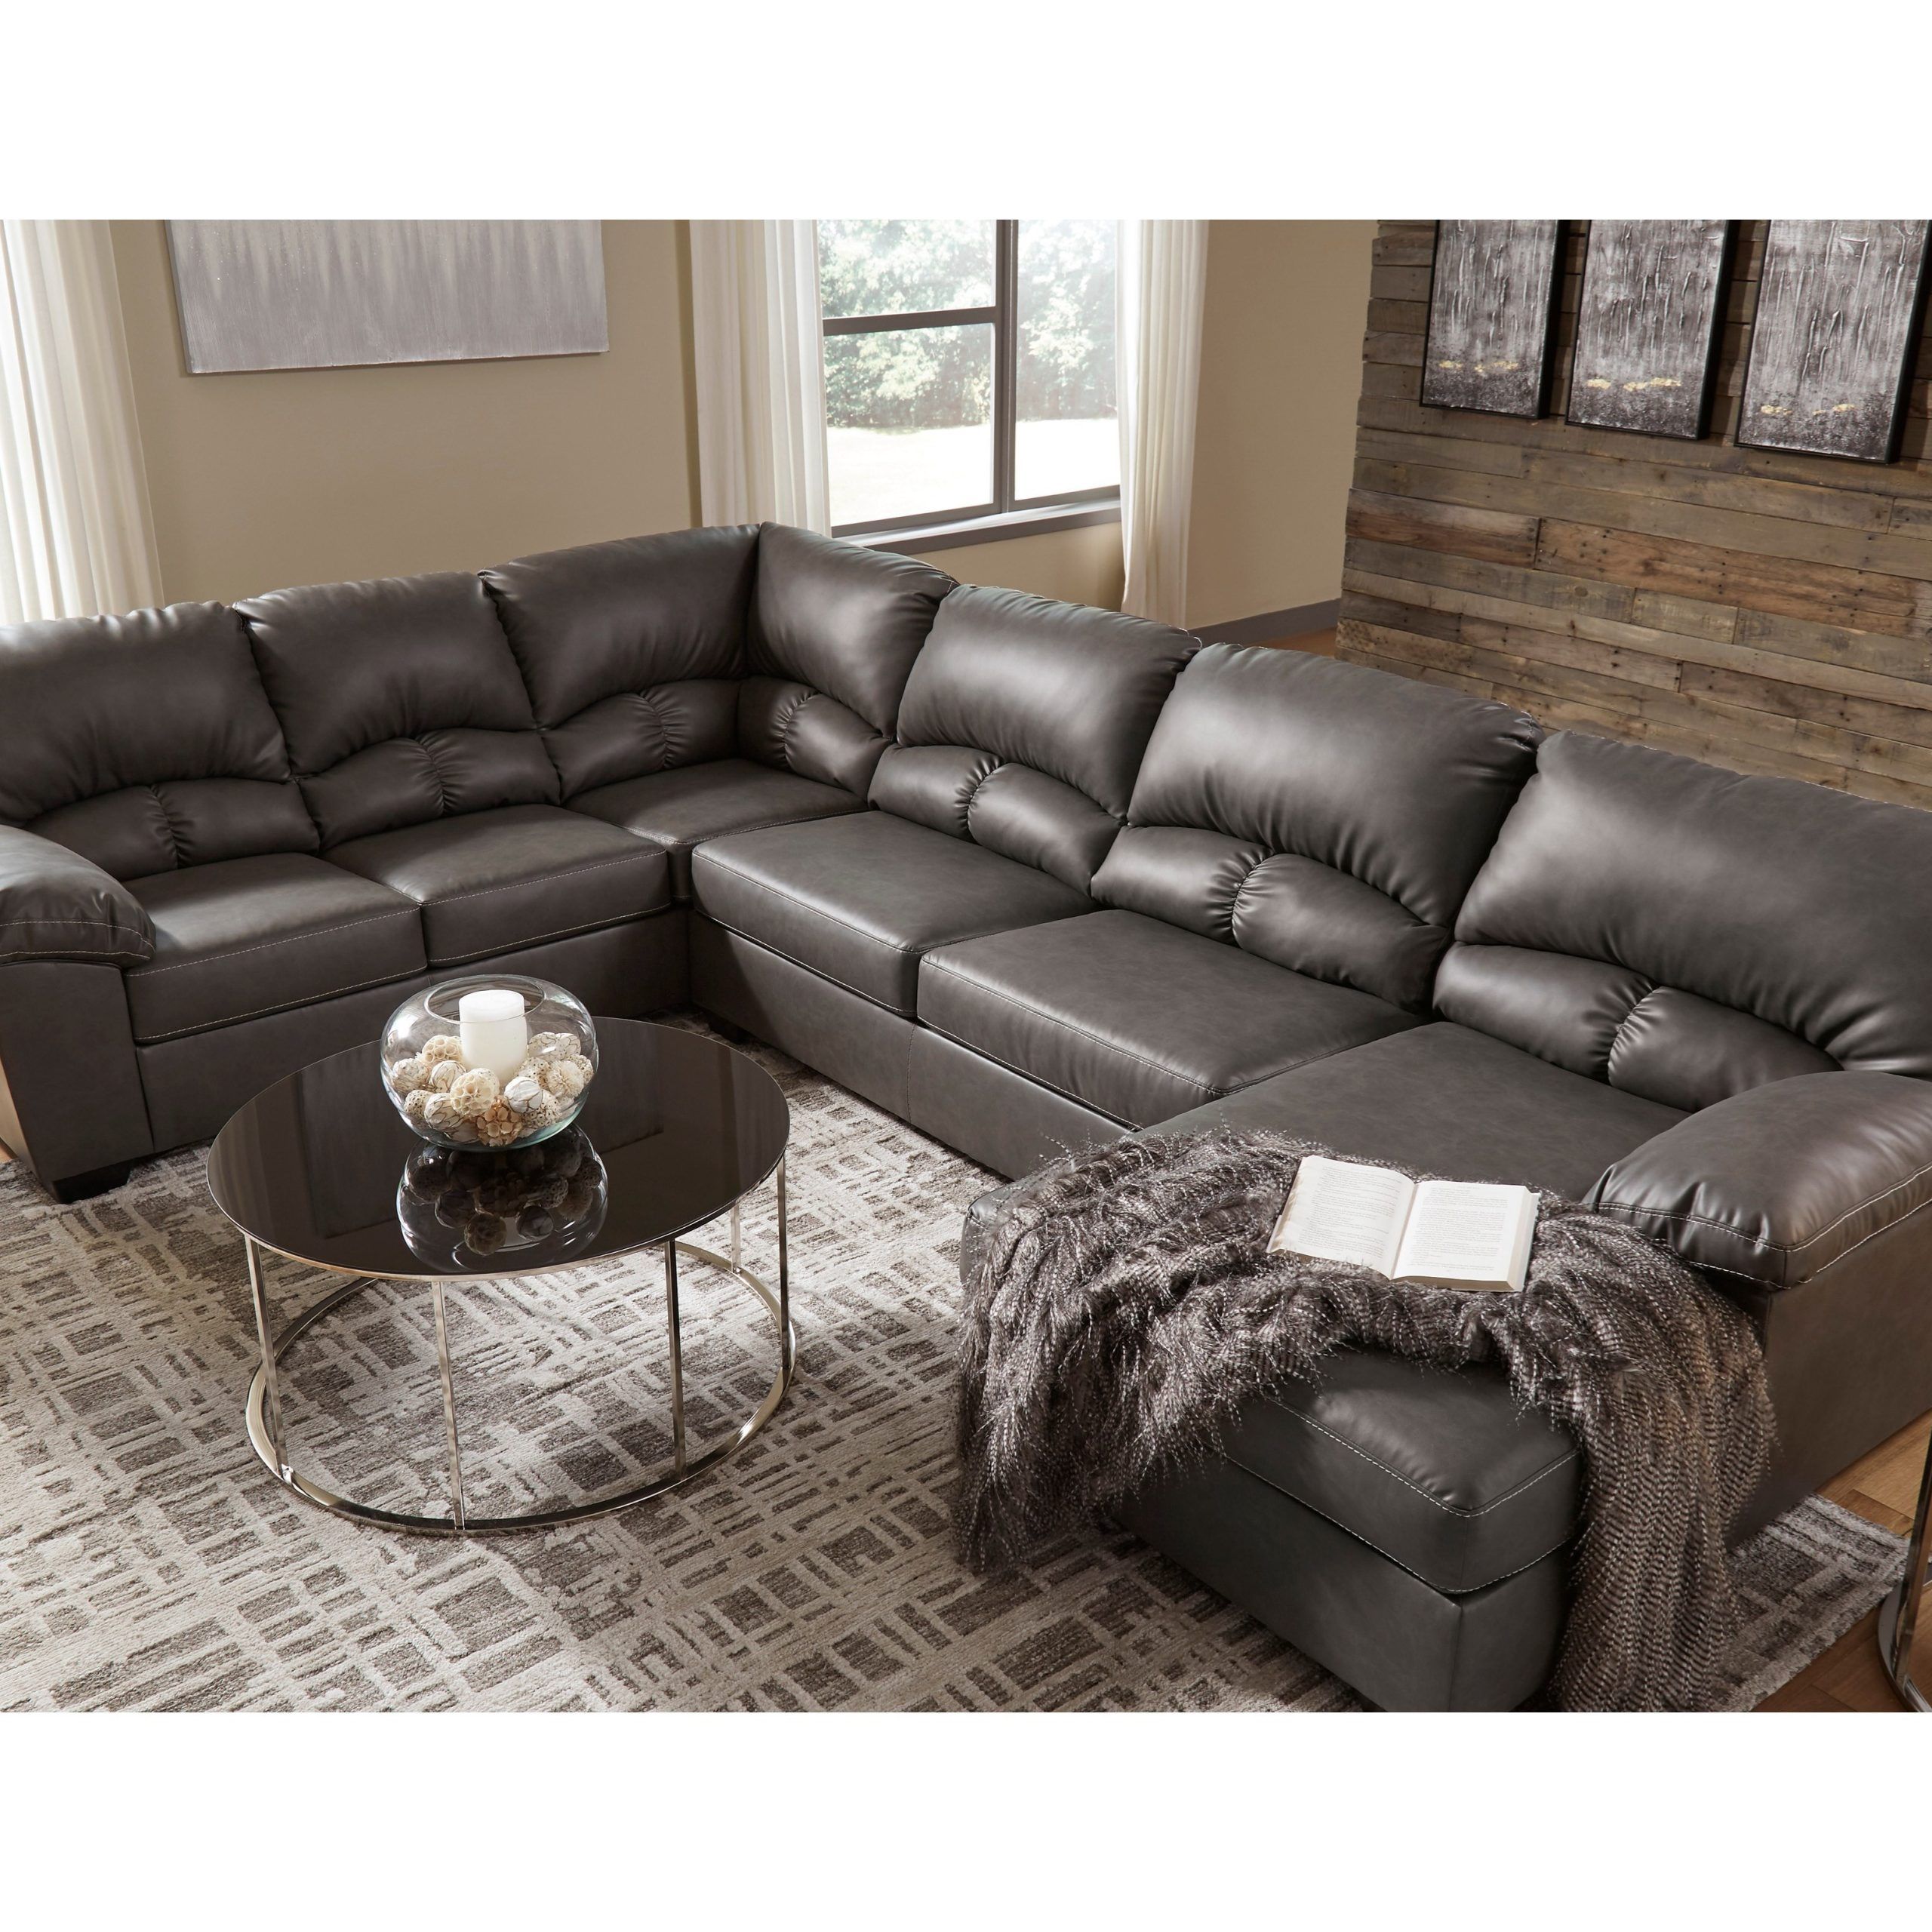 Benchcraft Aberton Faux Leather 3 Piece Sectional With Chaise | Wayside Pertaining To 3 Piece Leather Sectional Sofa Sets (View 2 of 20)